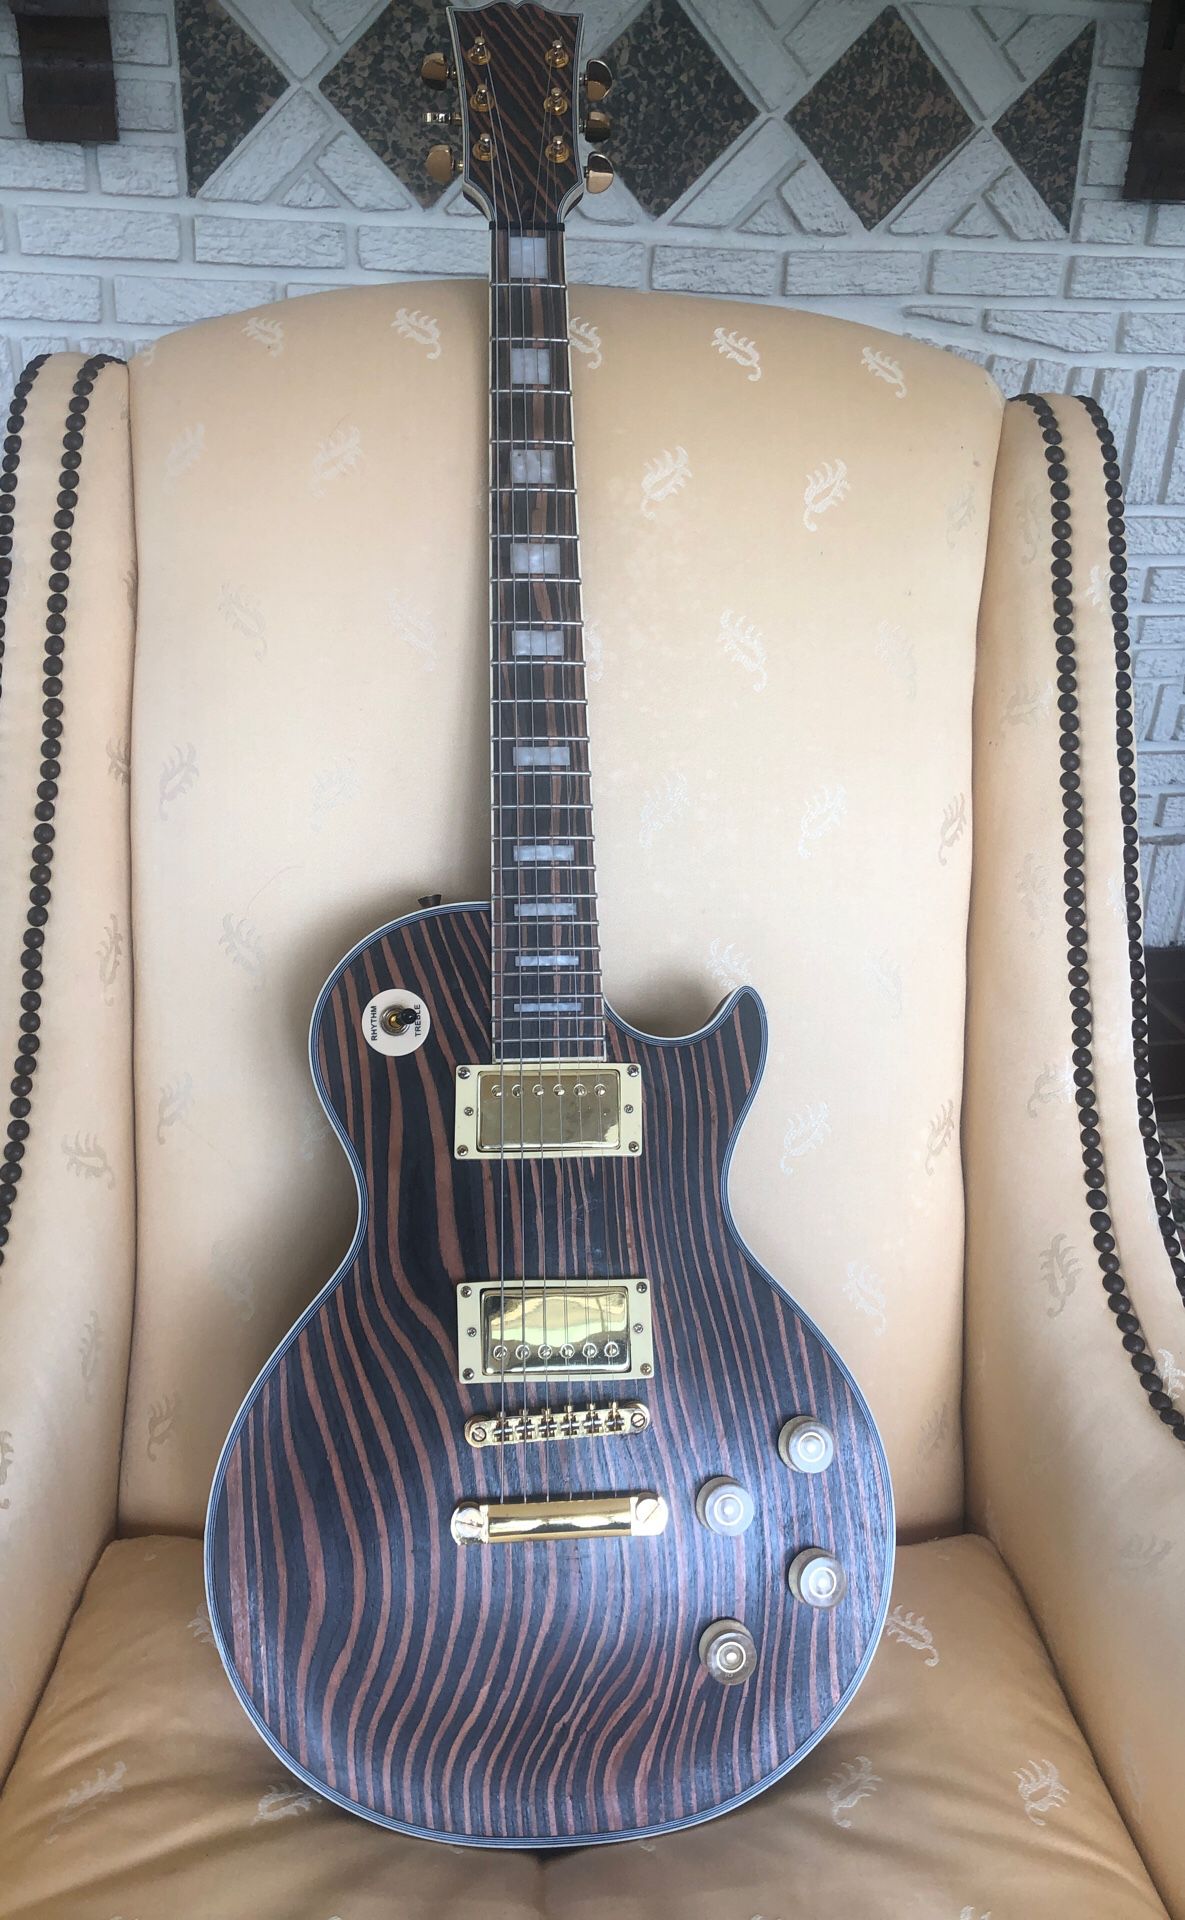 Custom les Paul style guitar. Very unique! All high quality parts. Professionally set up for great sound and easy playing!